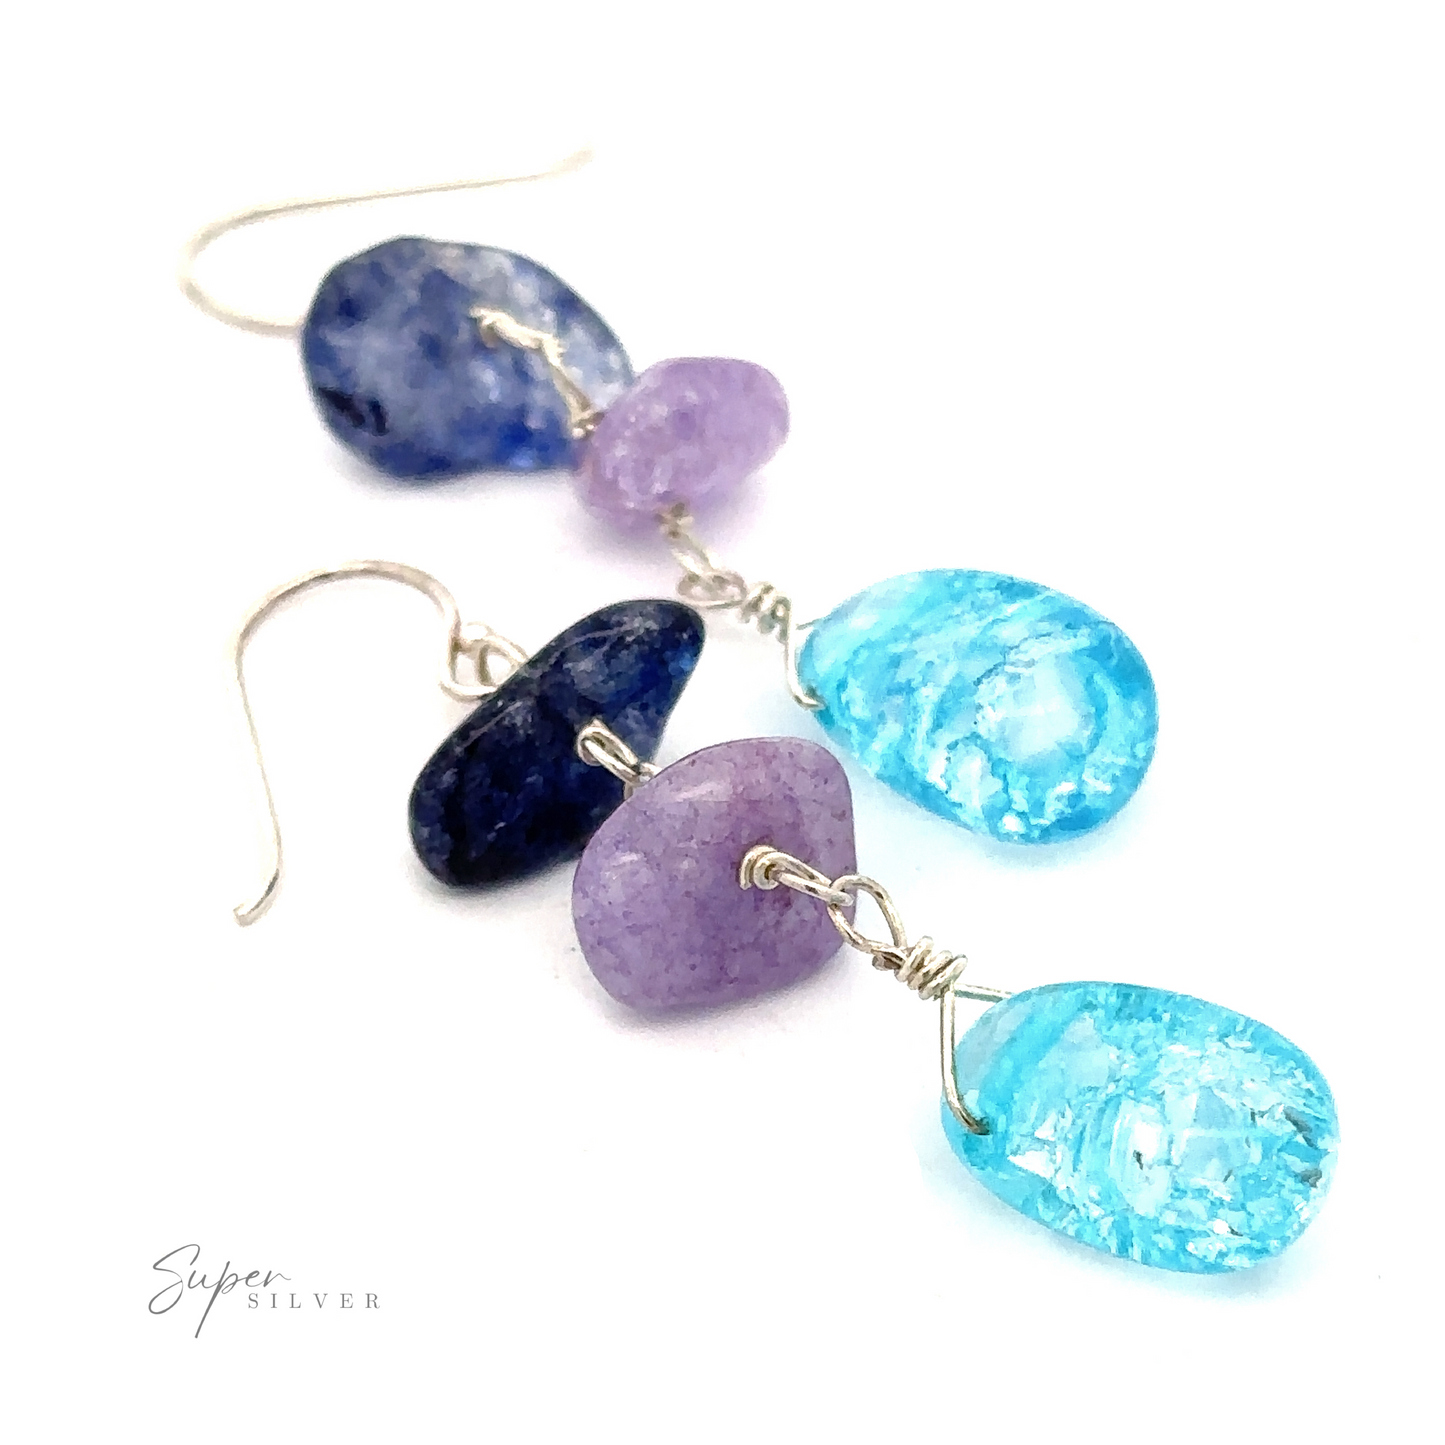 A pair of **Beaded Blue and Purple Earrings** featuring sterling silver hooks and three stones (bright blue beads, purple, and turquoise) on each. The stones are wire-wrapped with silver. The brand name "Super Silver" is visible in the corner.